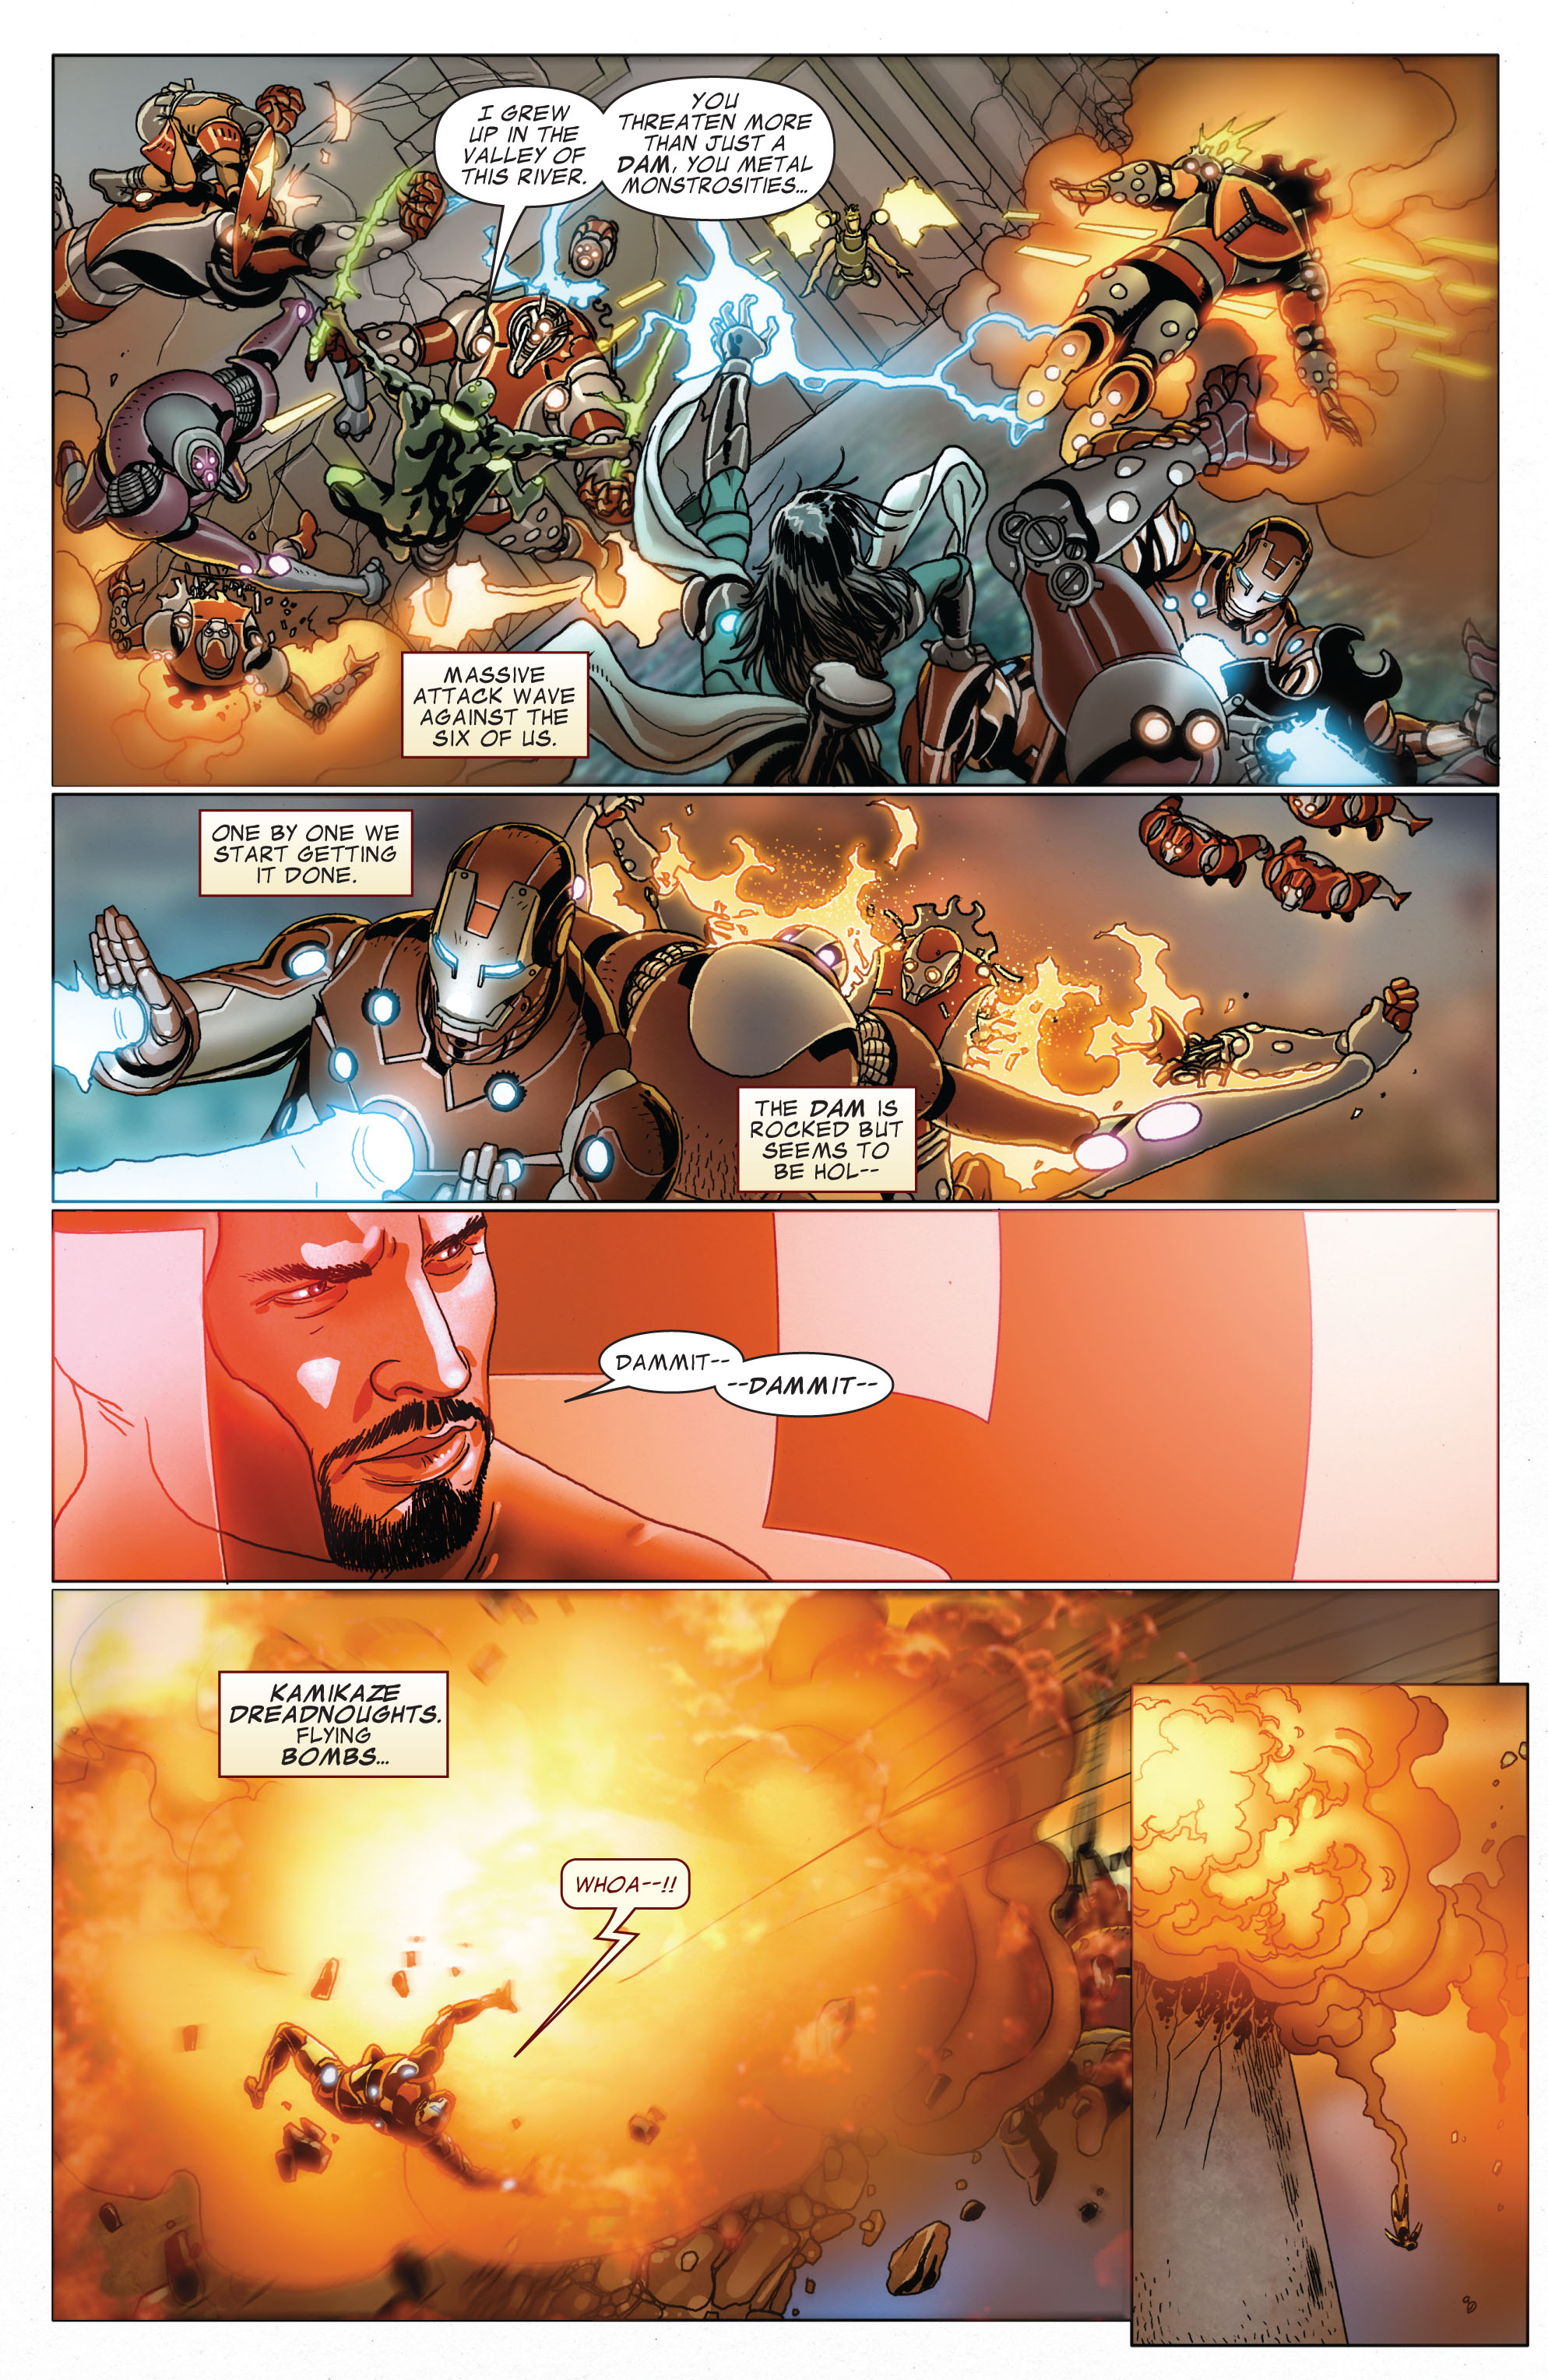 Invincible Iron Man (2008) 513 Page 7